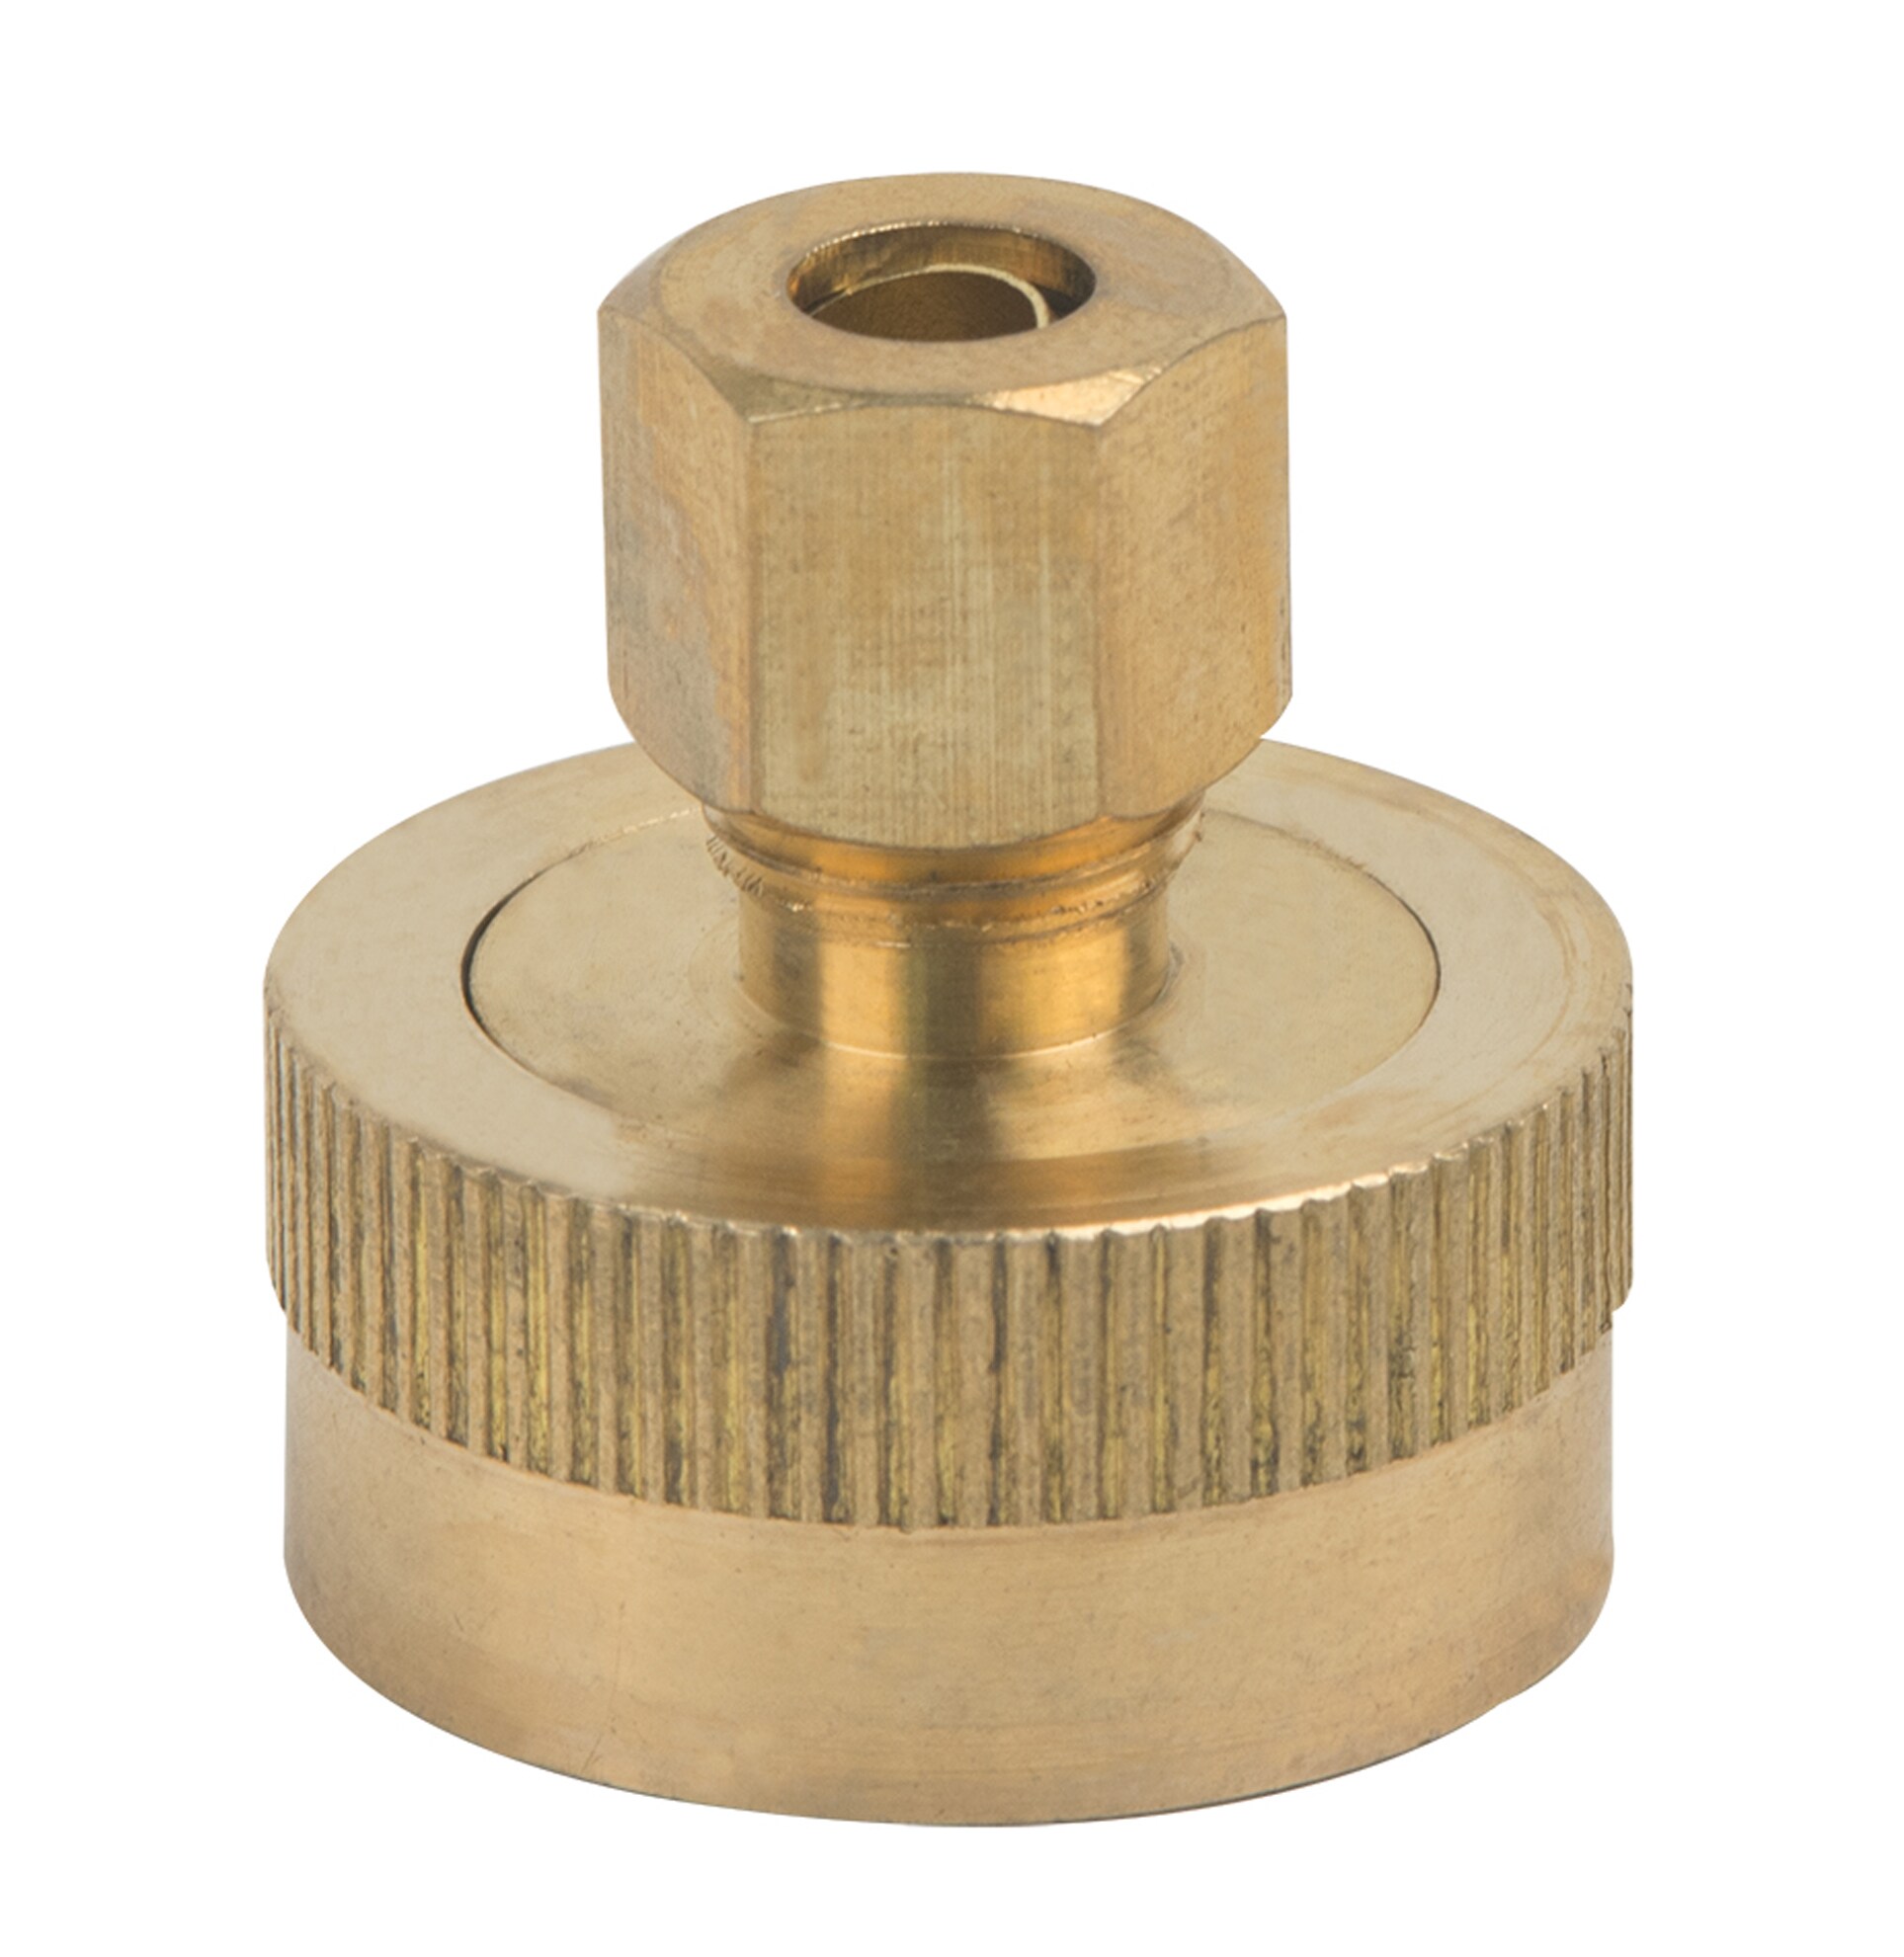 Threaded Brass Garden lawn Water Hose pipe fitting Connector tap adaptor 3/4" CA 